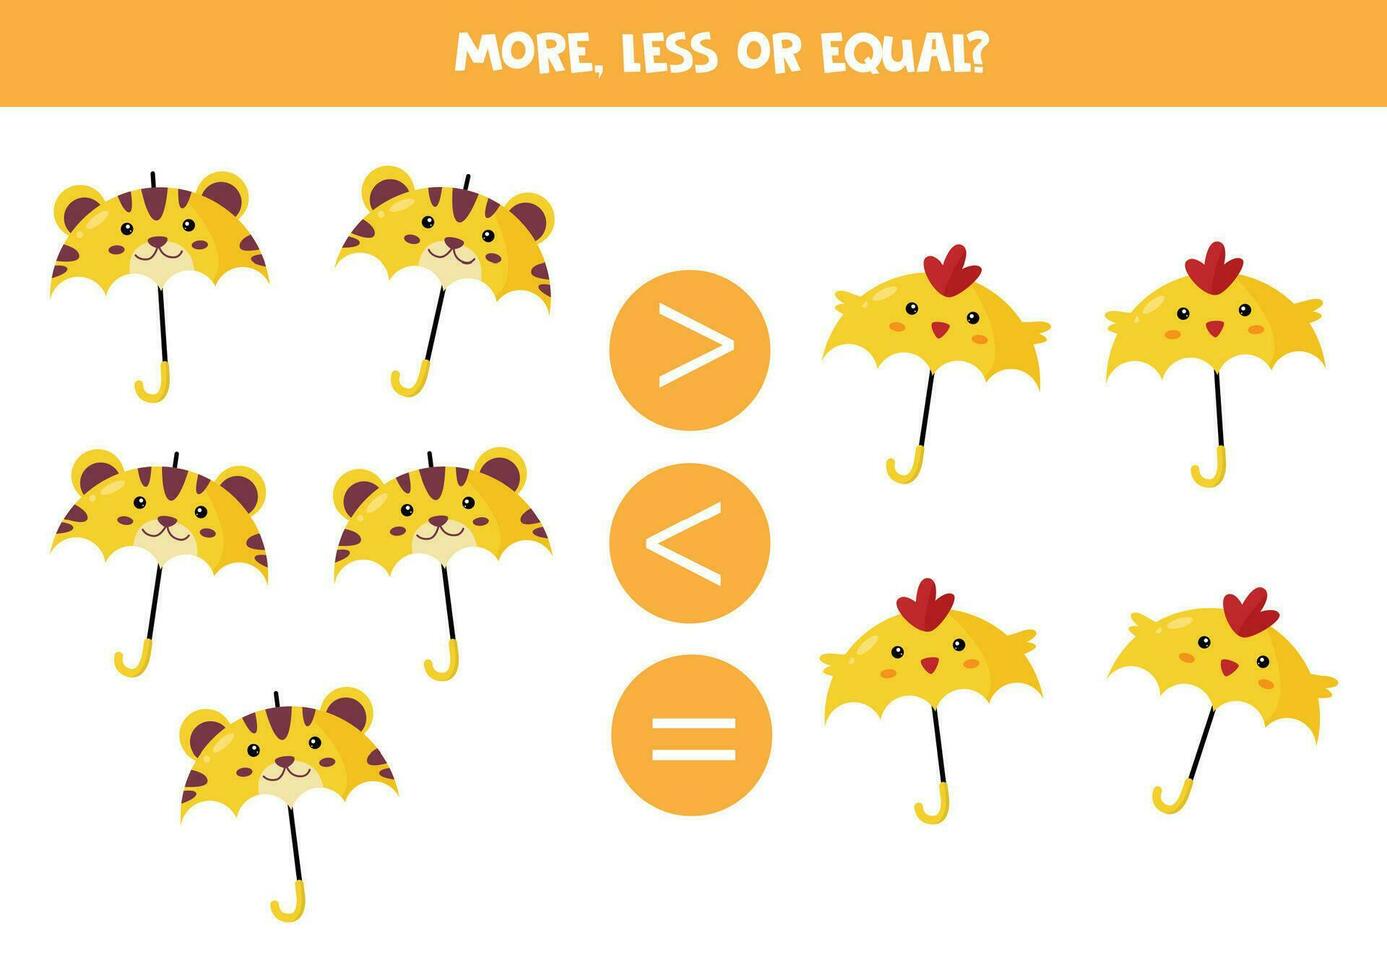 Grater, less or equal with cute cartoon animal umbrellas. vector